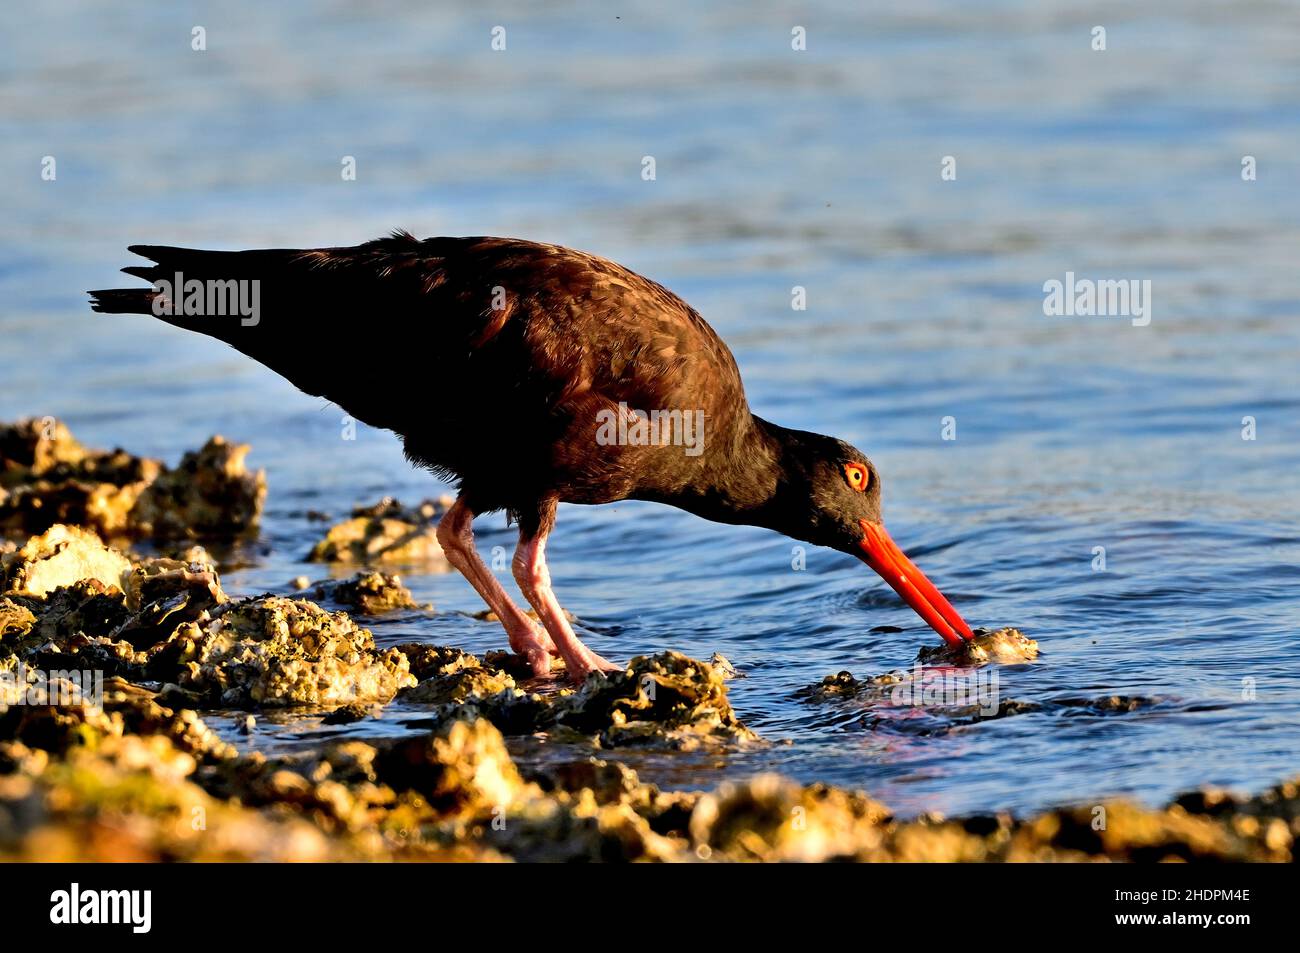 A Black Oystercatcher shorebird (Haematopus bachmani)  in the early morning light foraging a wild oyster on the shore of Vancouver Island B.C. Stock Photo